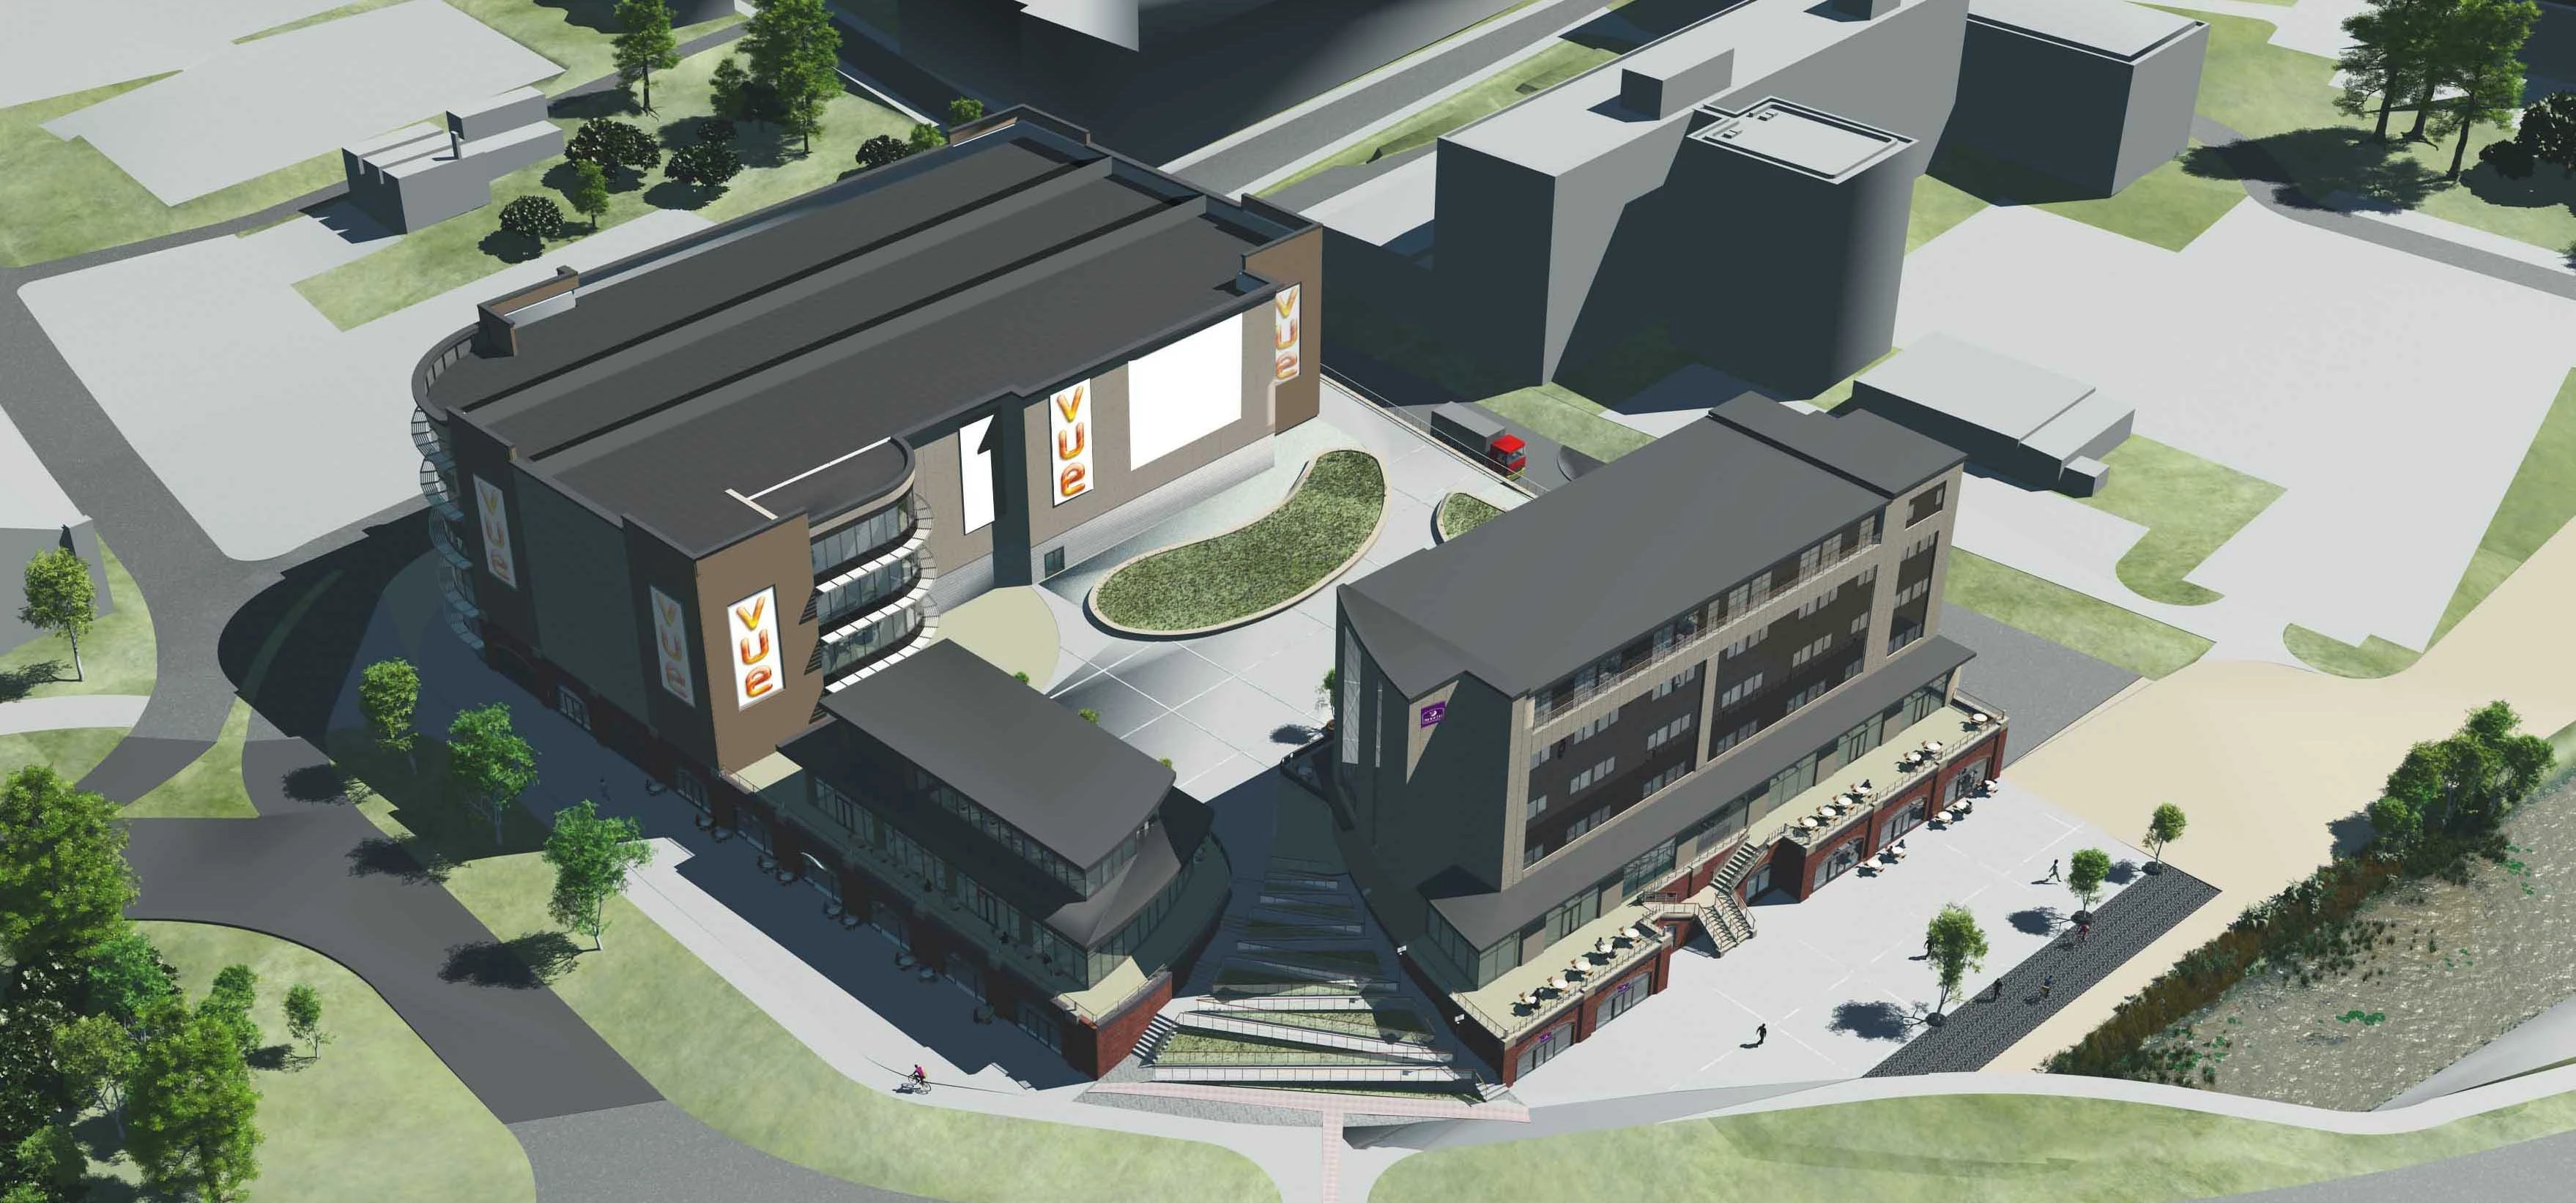 An aerial view of the new Feethams leisure complex in Darlington, designed by Niven Architects